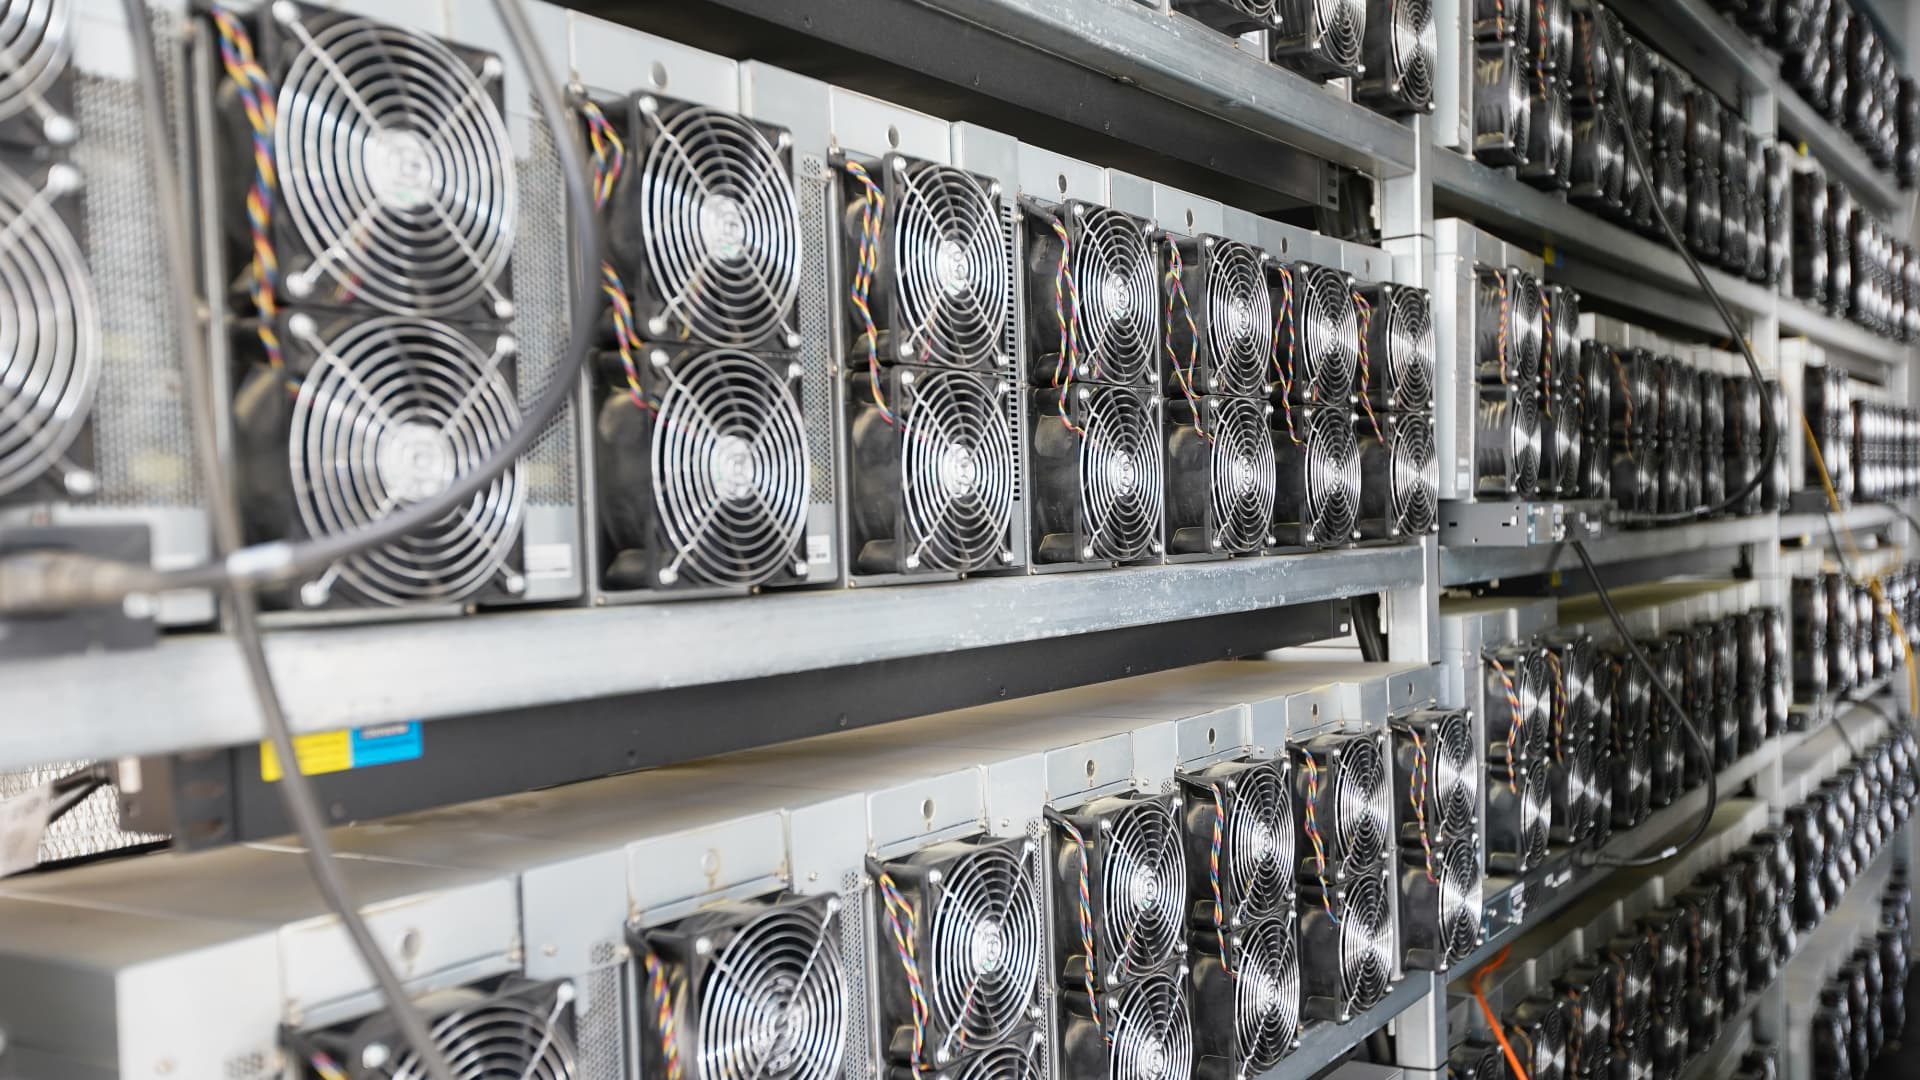 Bitcoin mining company Core Scientific on the brink of asphyxiation